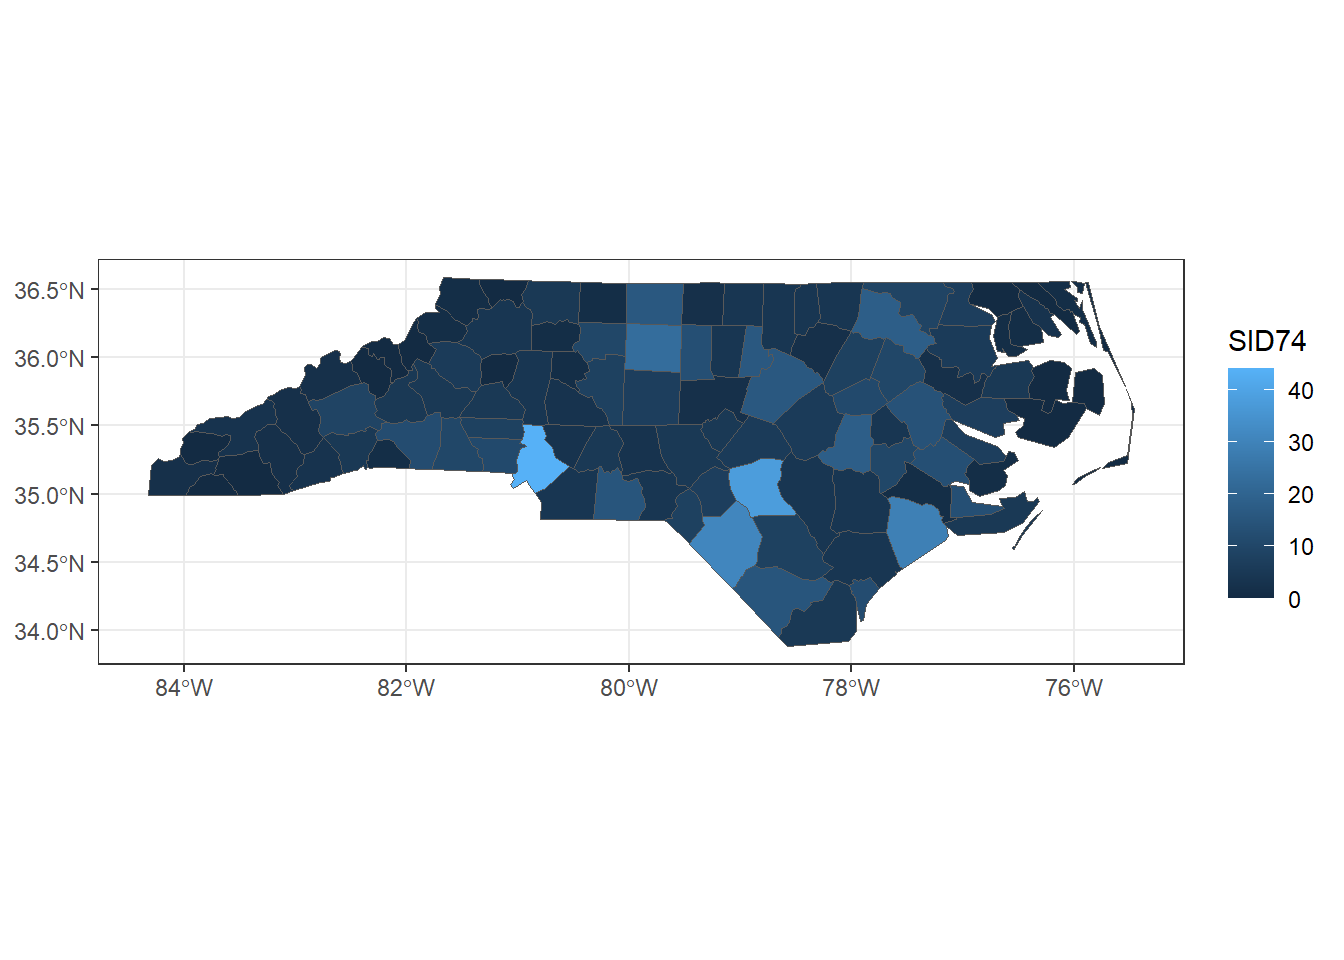 Map of sudden infant deaths in North Carolina in 1974, created with **ggplot2**.